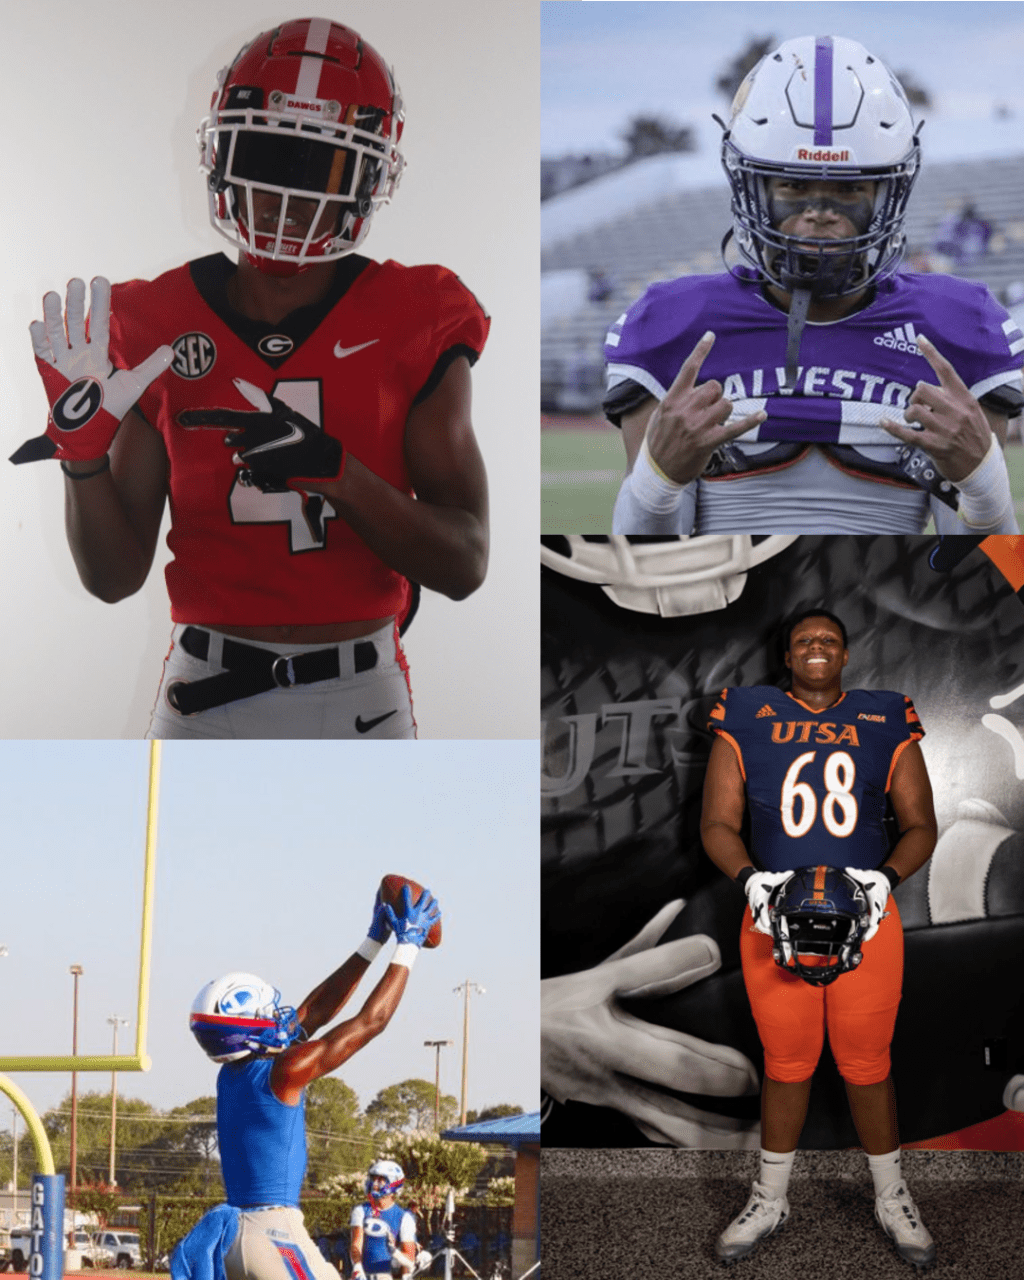 Texas Class of 2025 Recruits ON THE RISE!